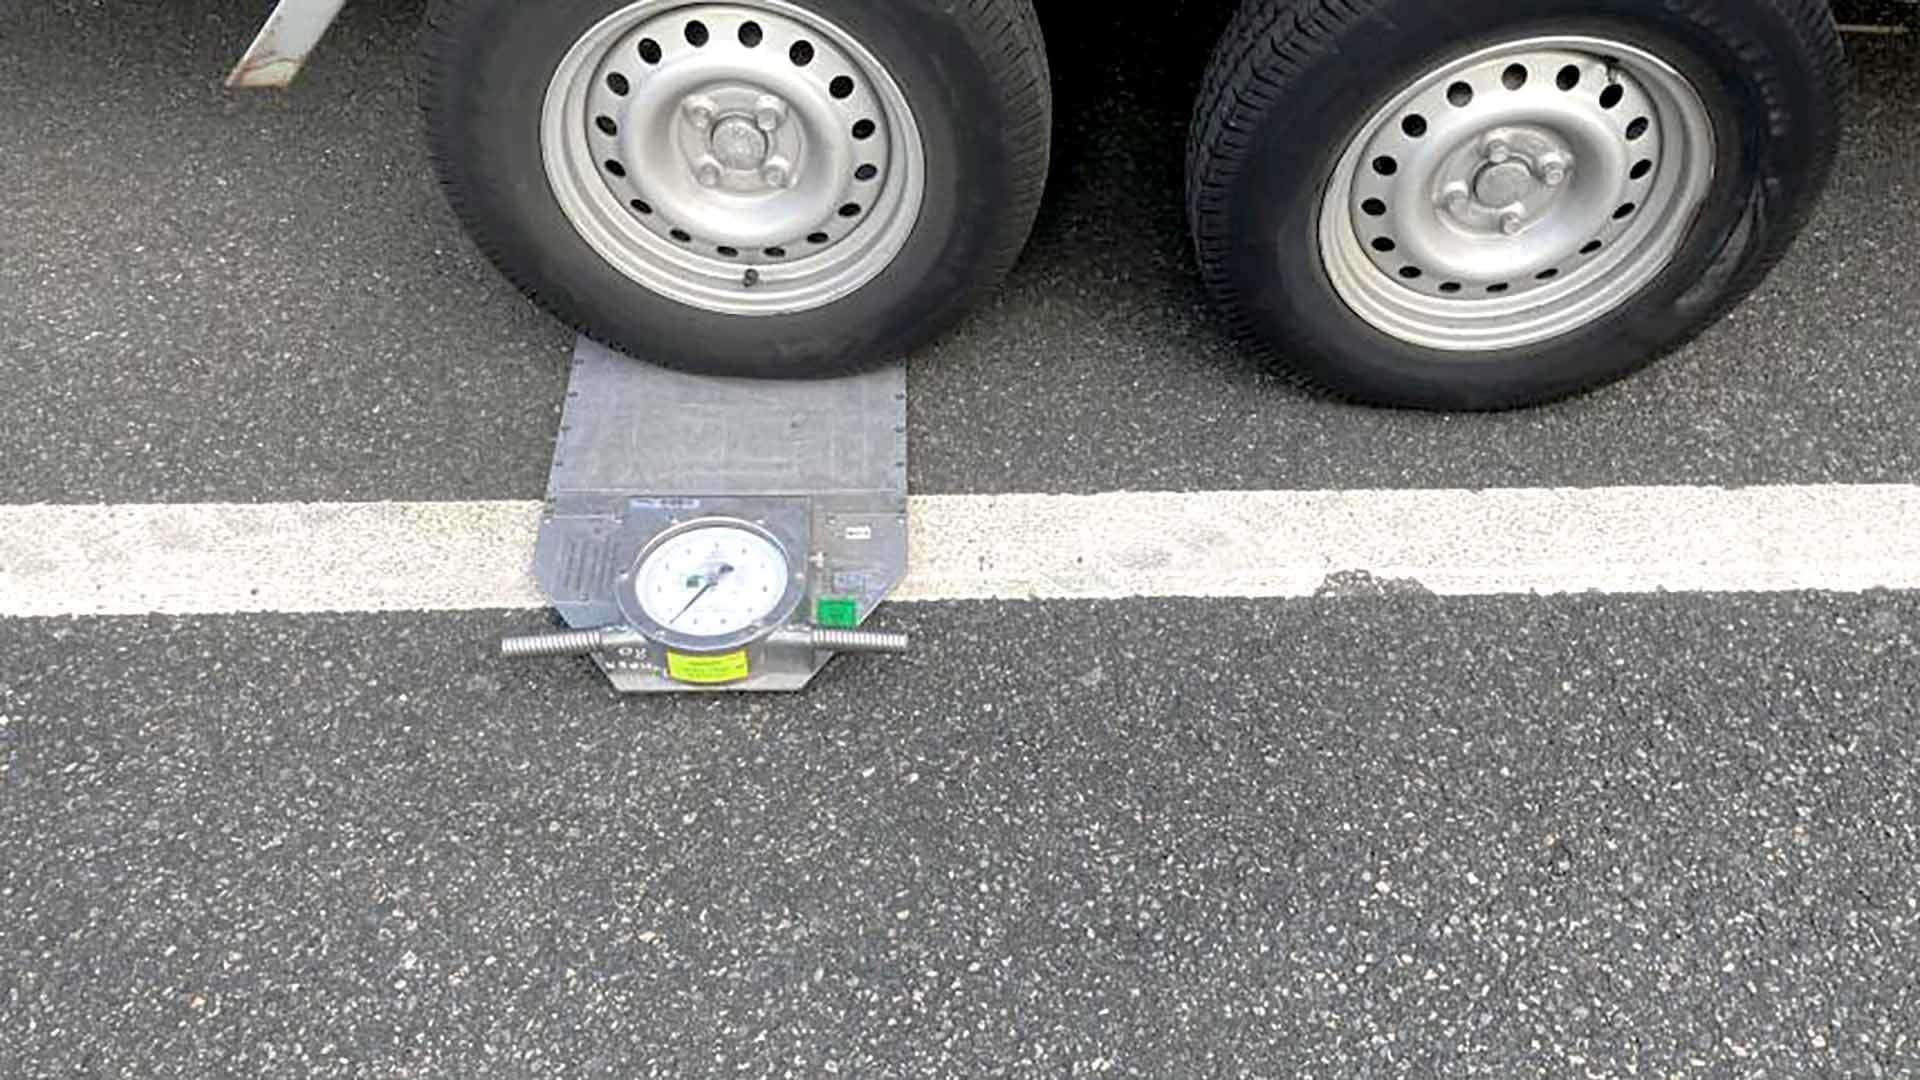 error 2 do not use leveling accessories before and after the mobile axle weighing